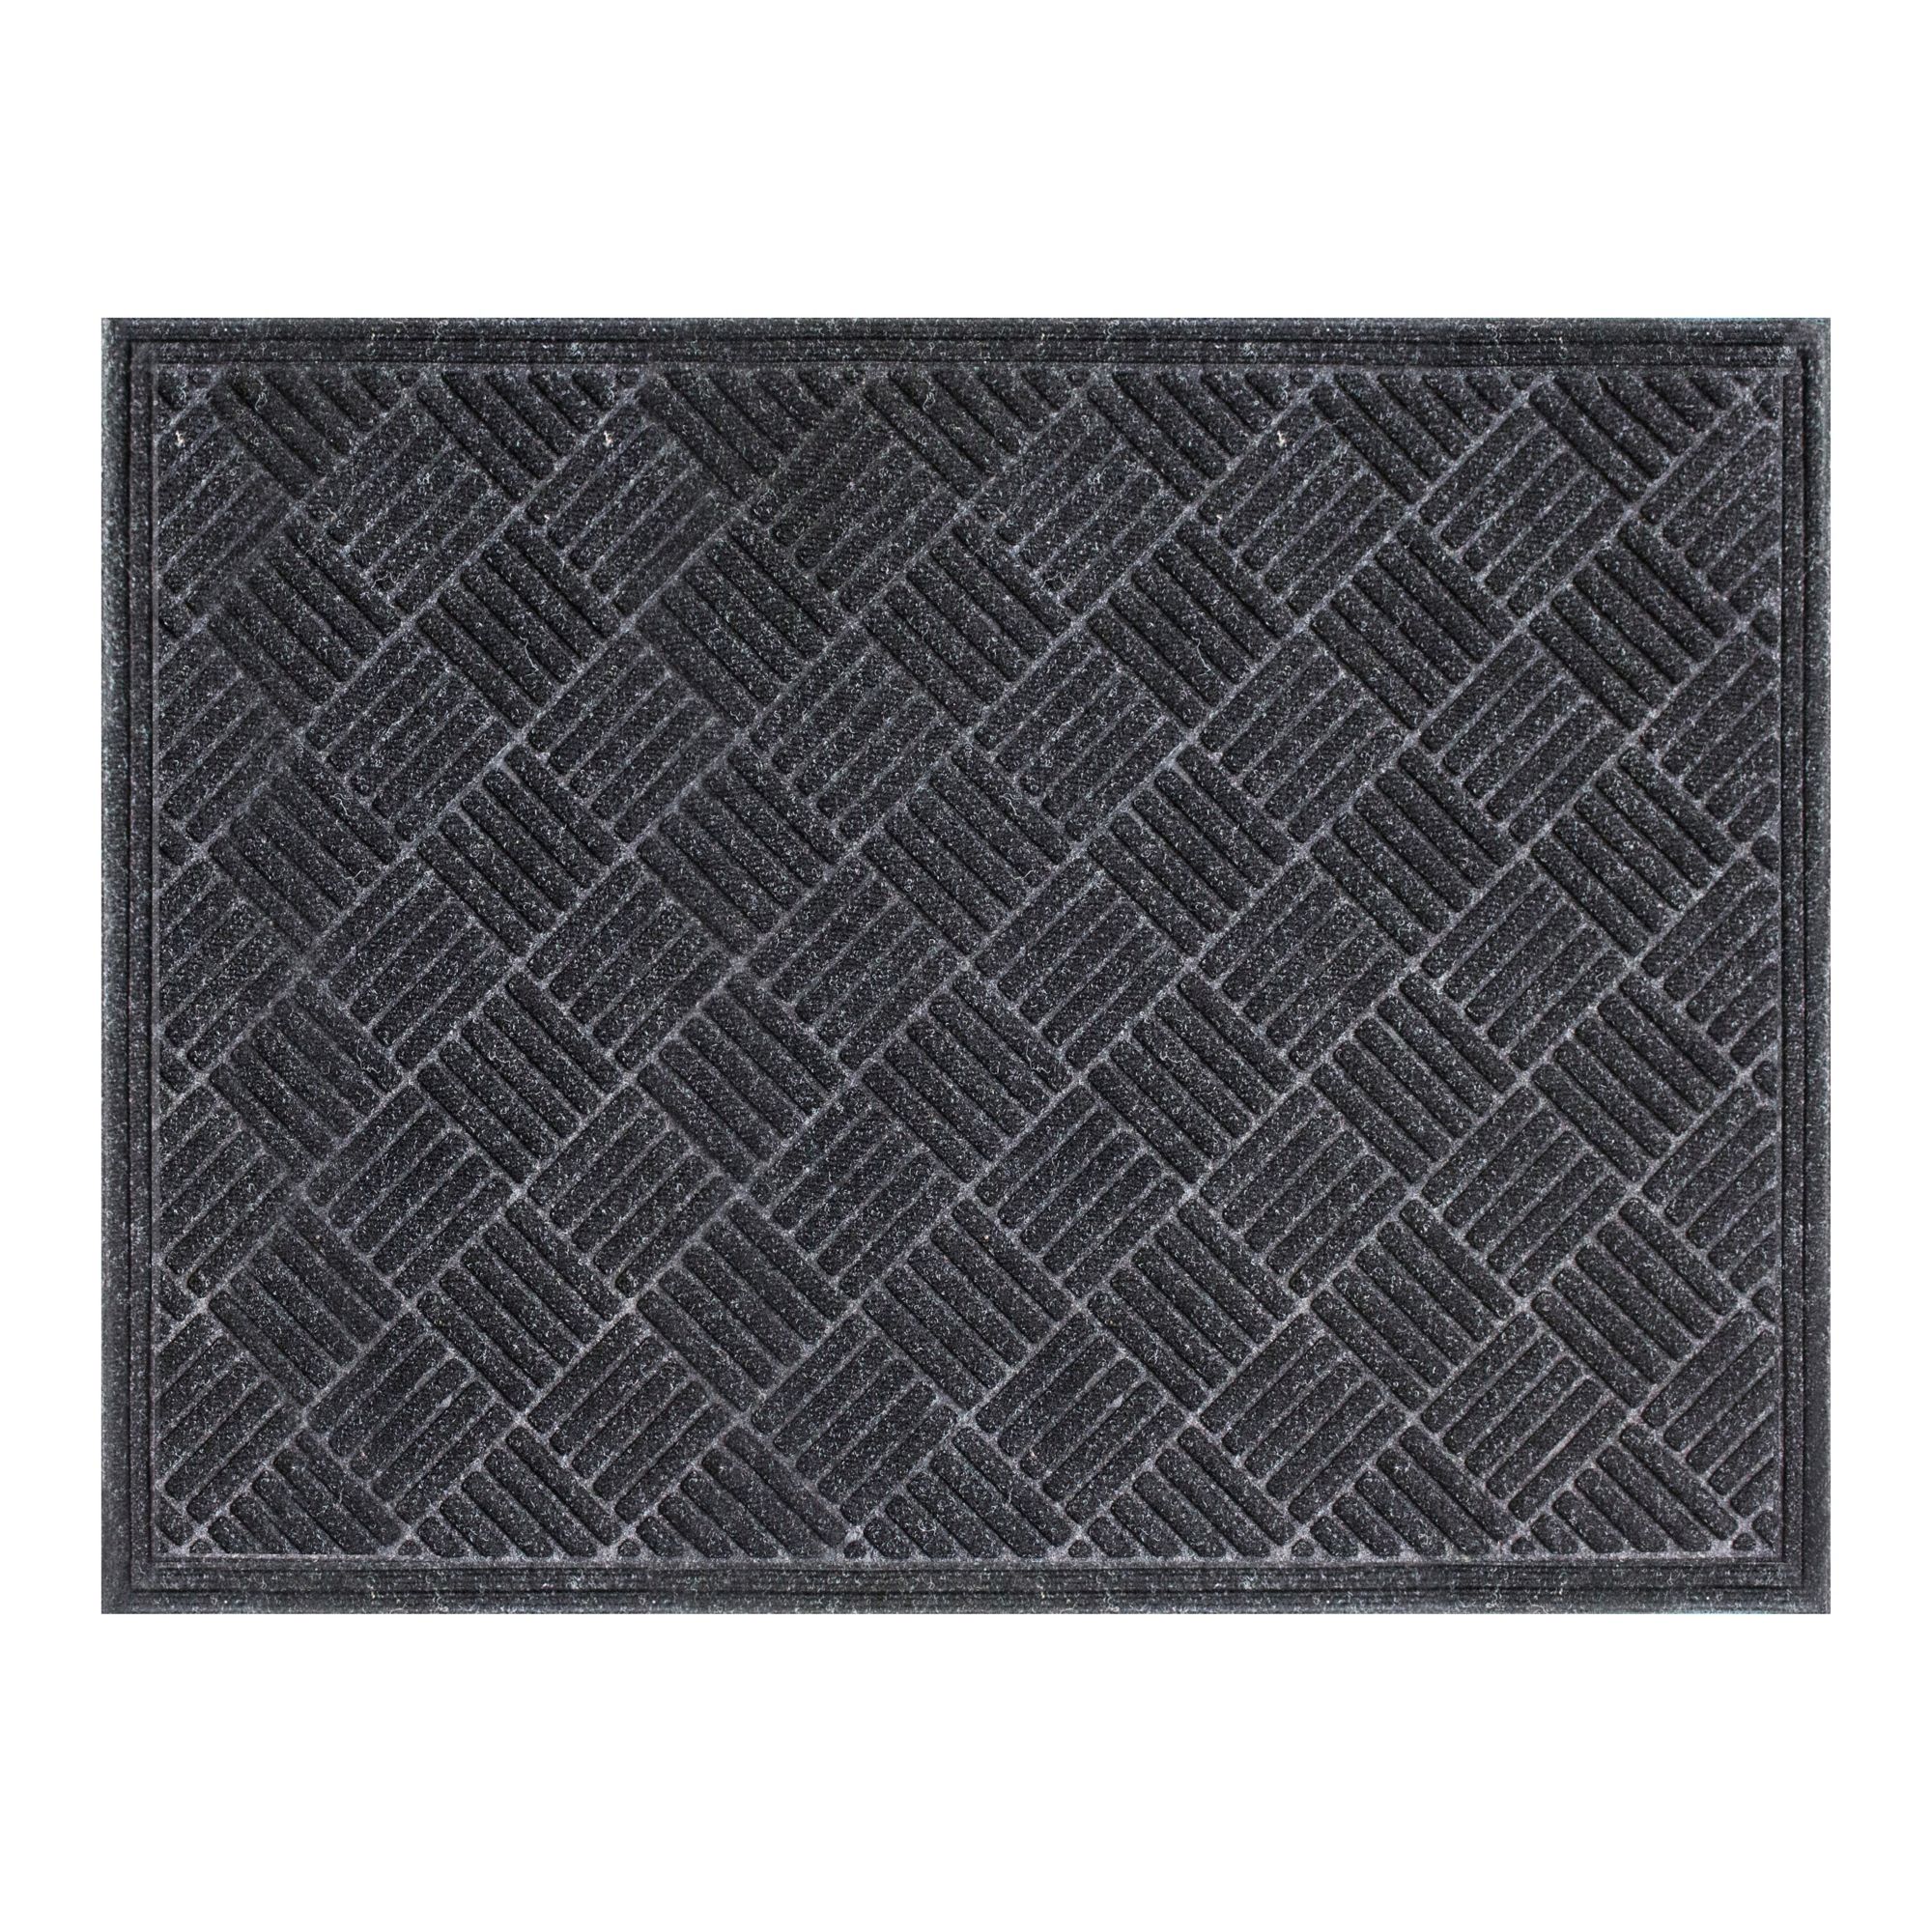 Entrance Mat For Home, Thick Non-slip Doormat, Mud Remover, Water